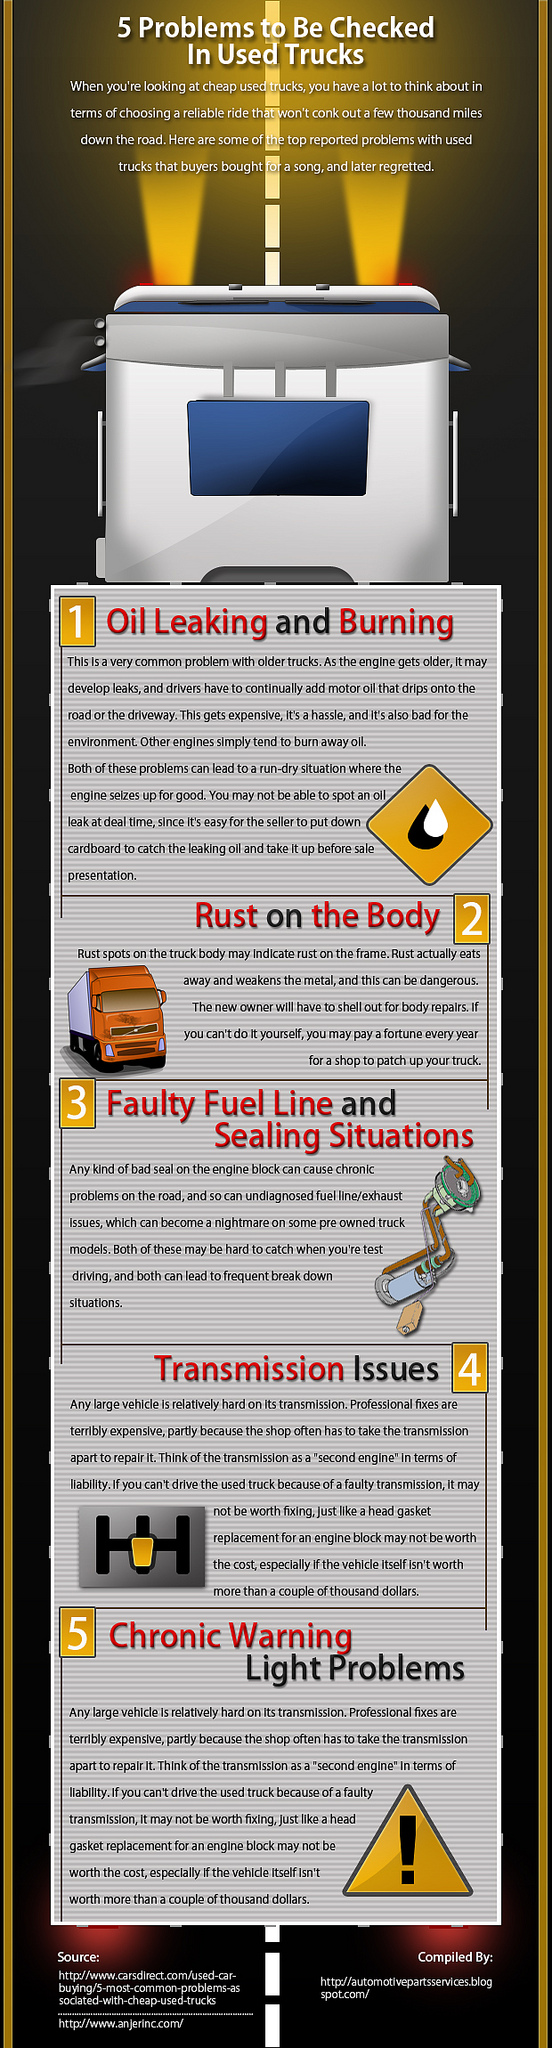 Top 5 Problems to be Checked in Used Trucks